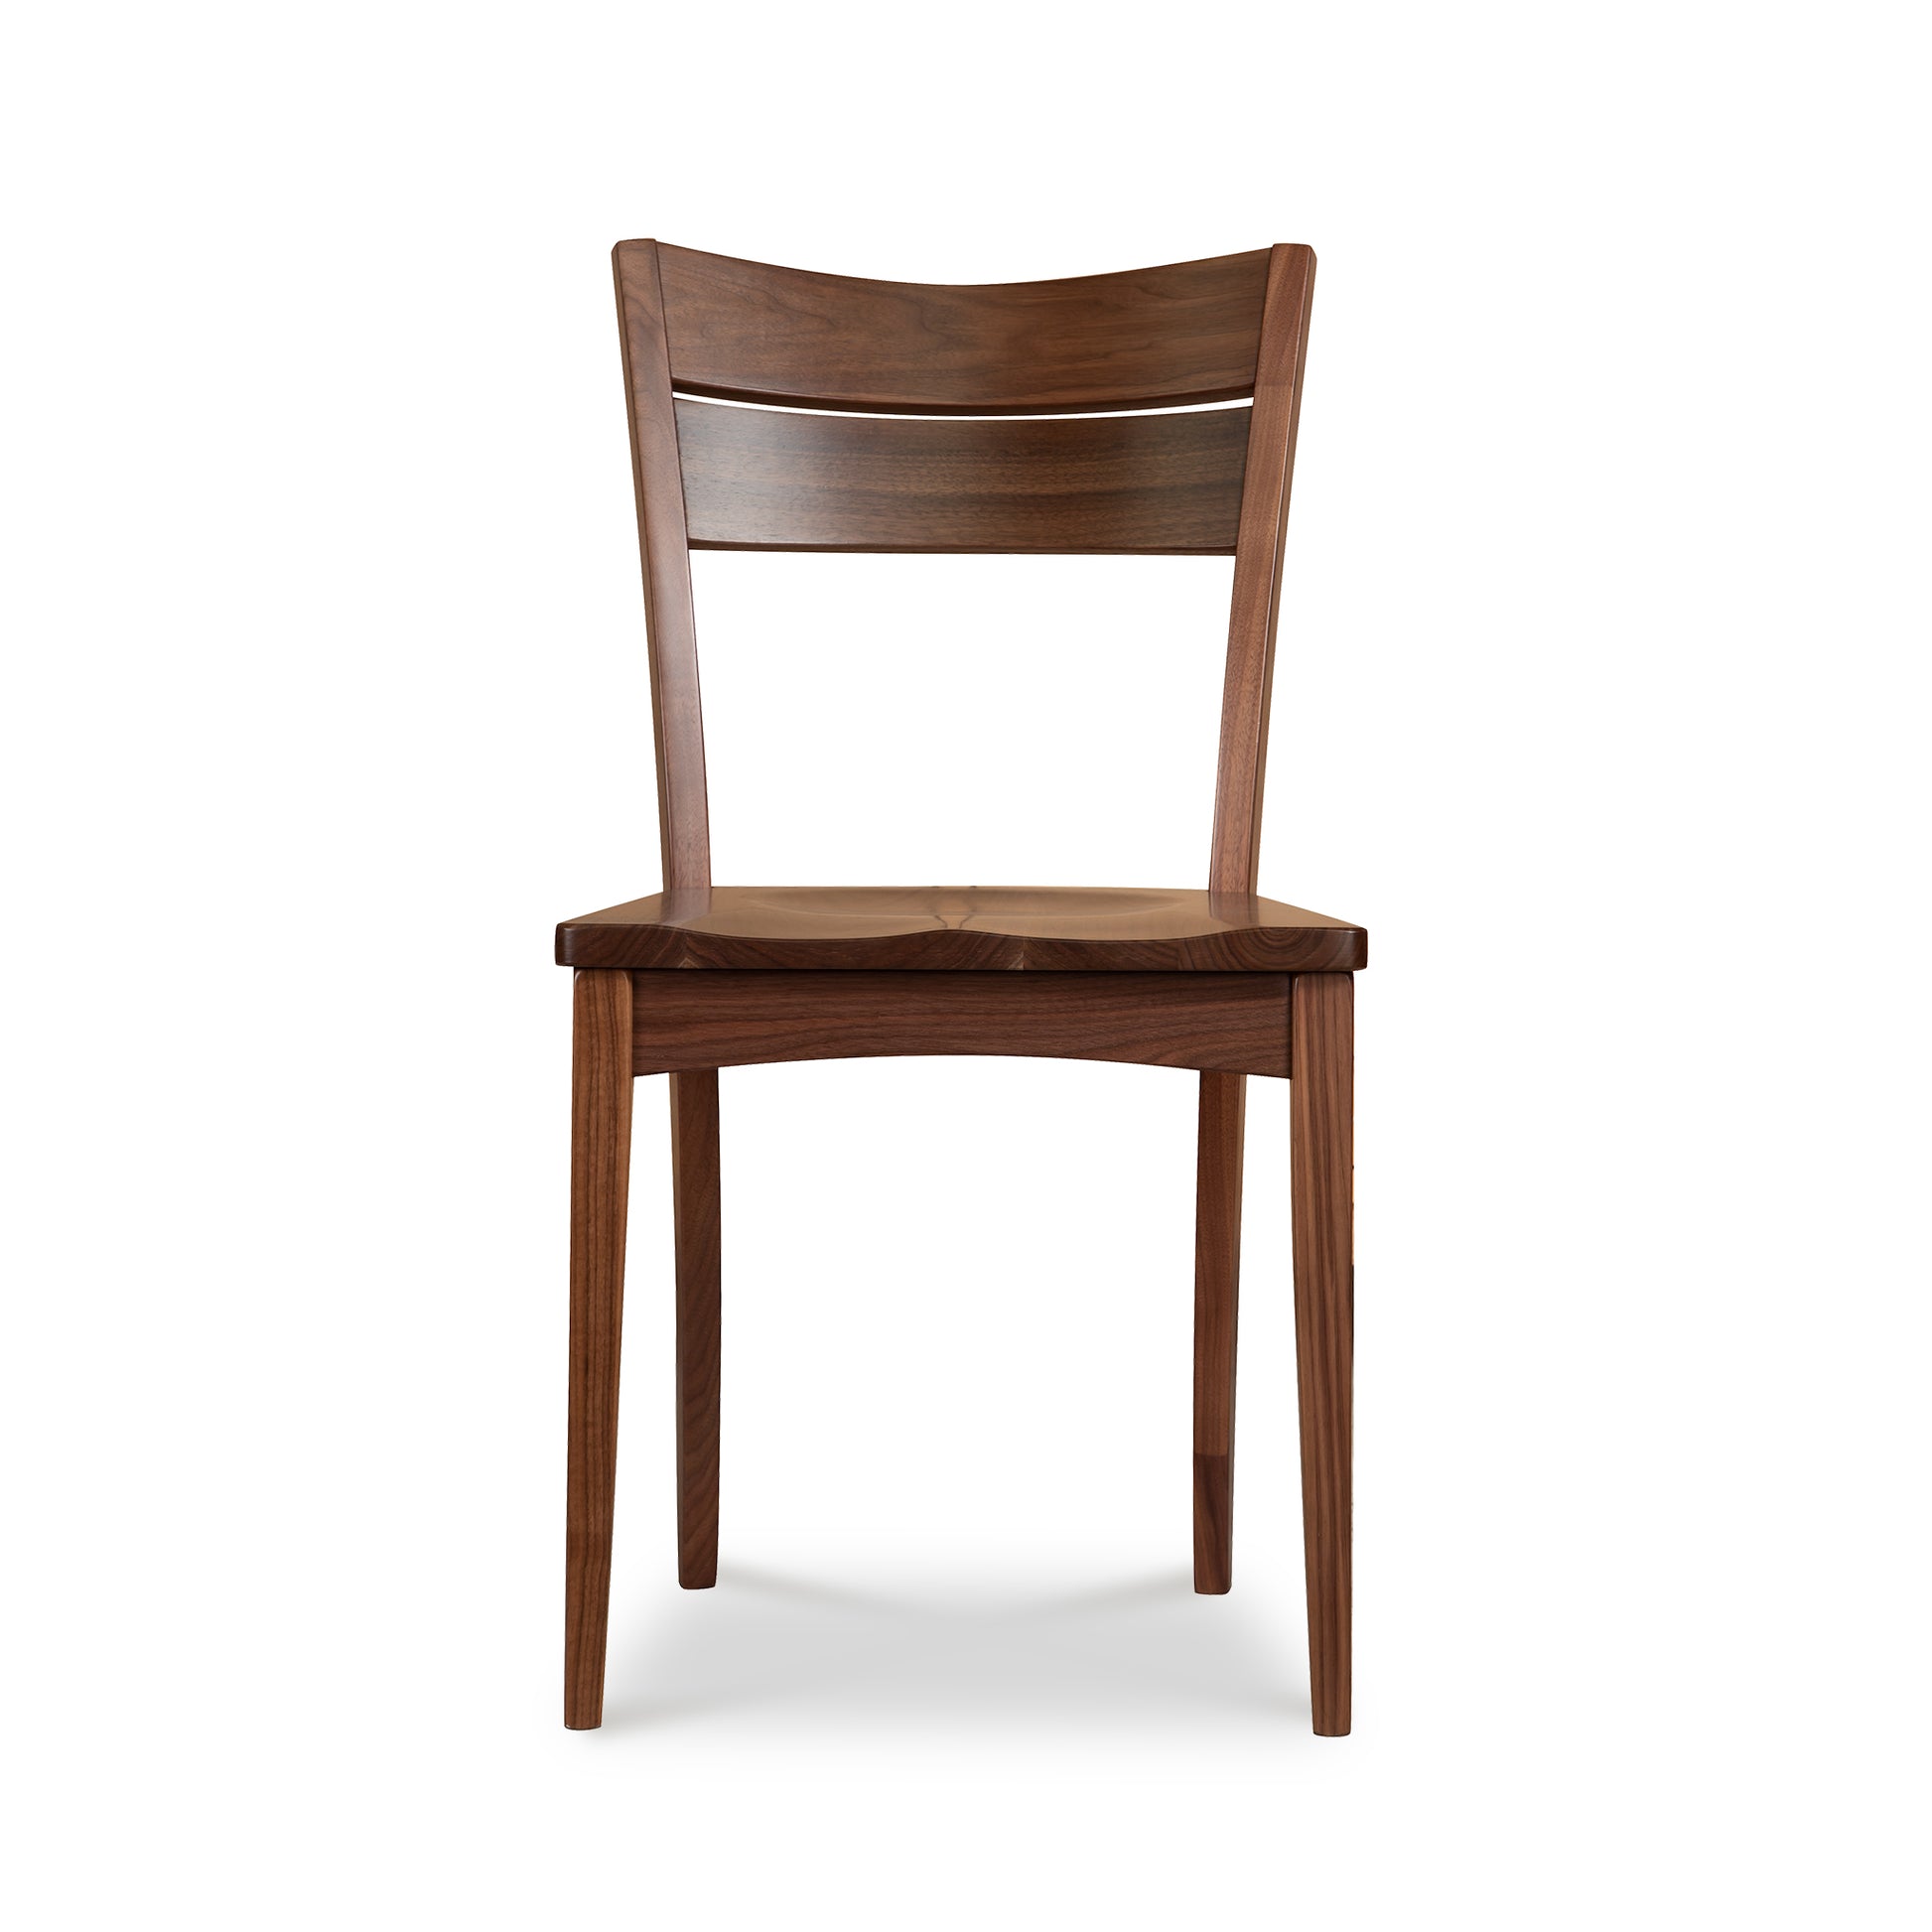 A wooden dining chair with a wooden seat.